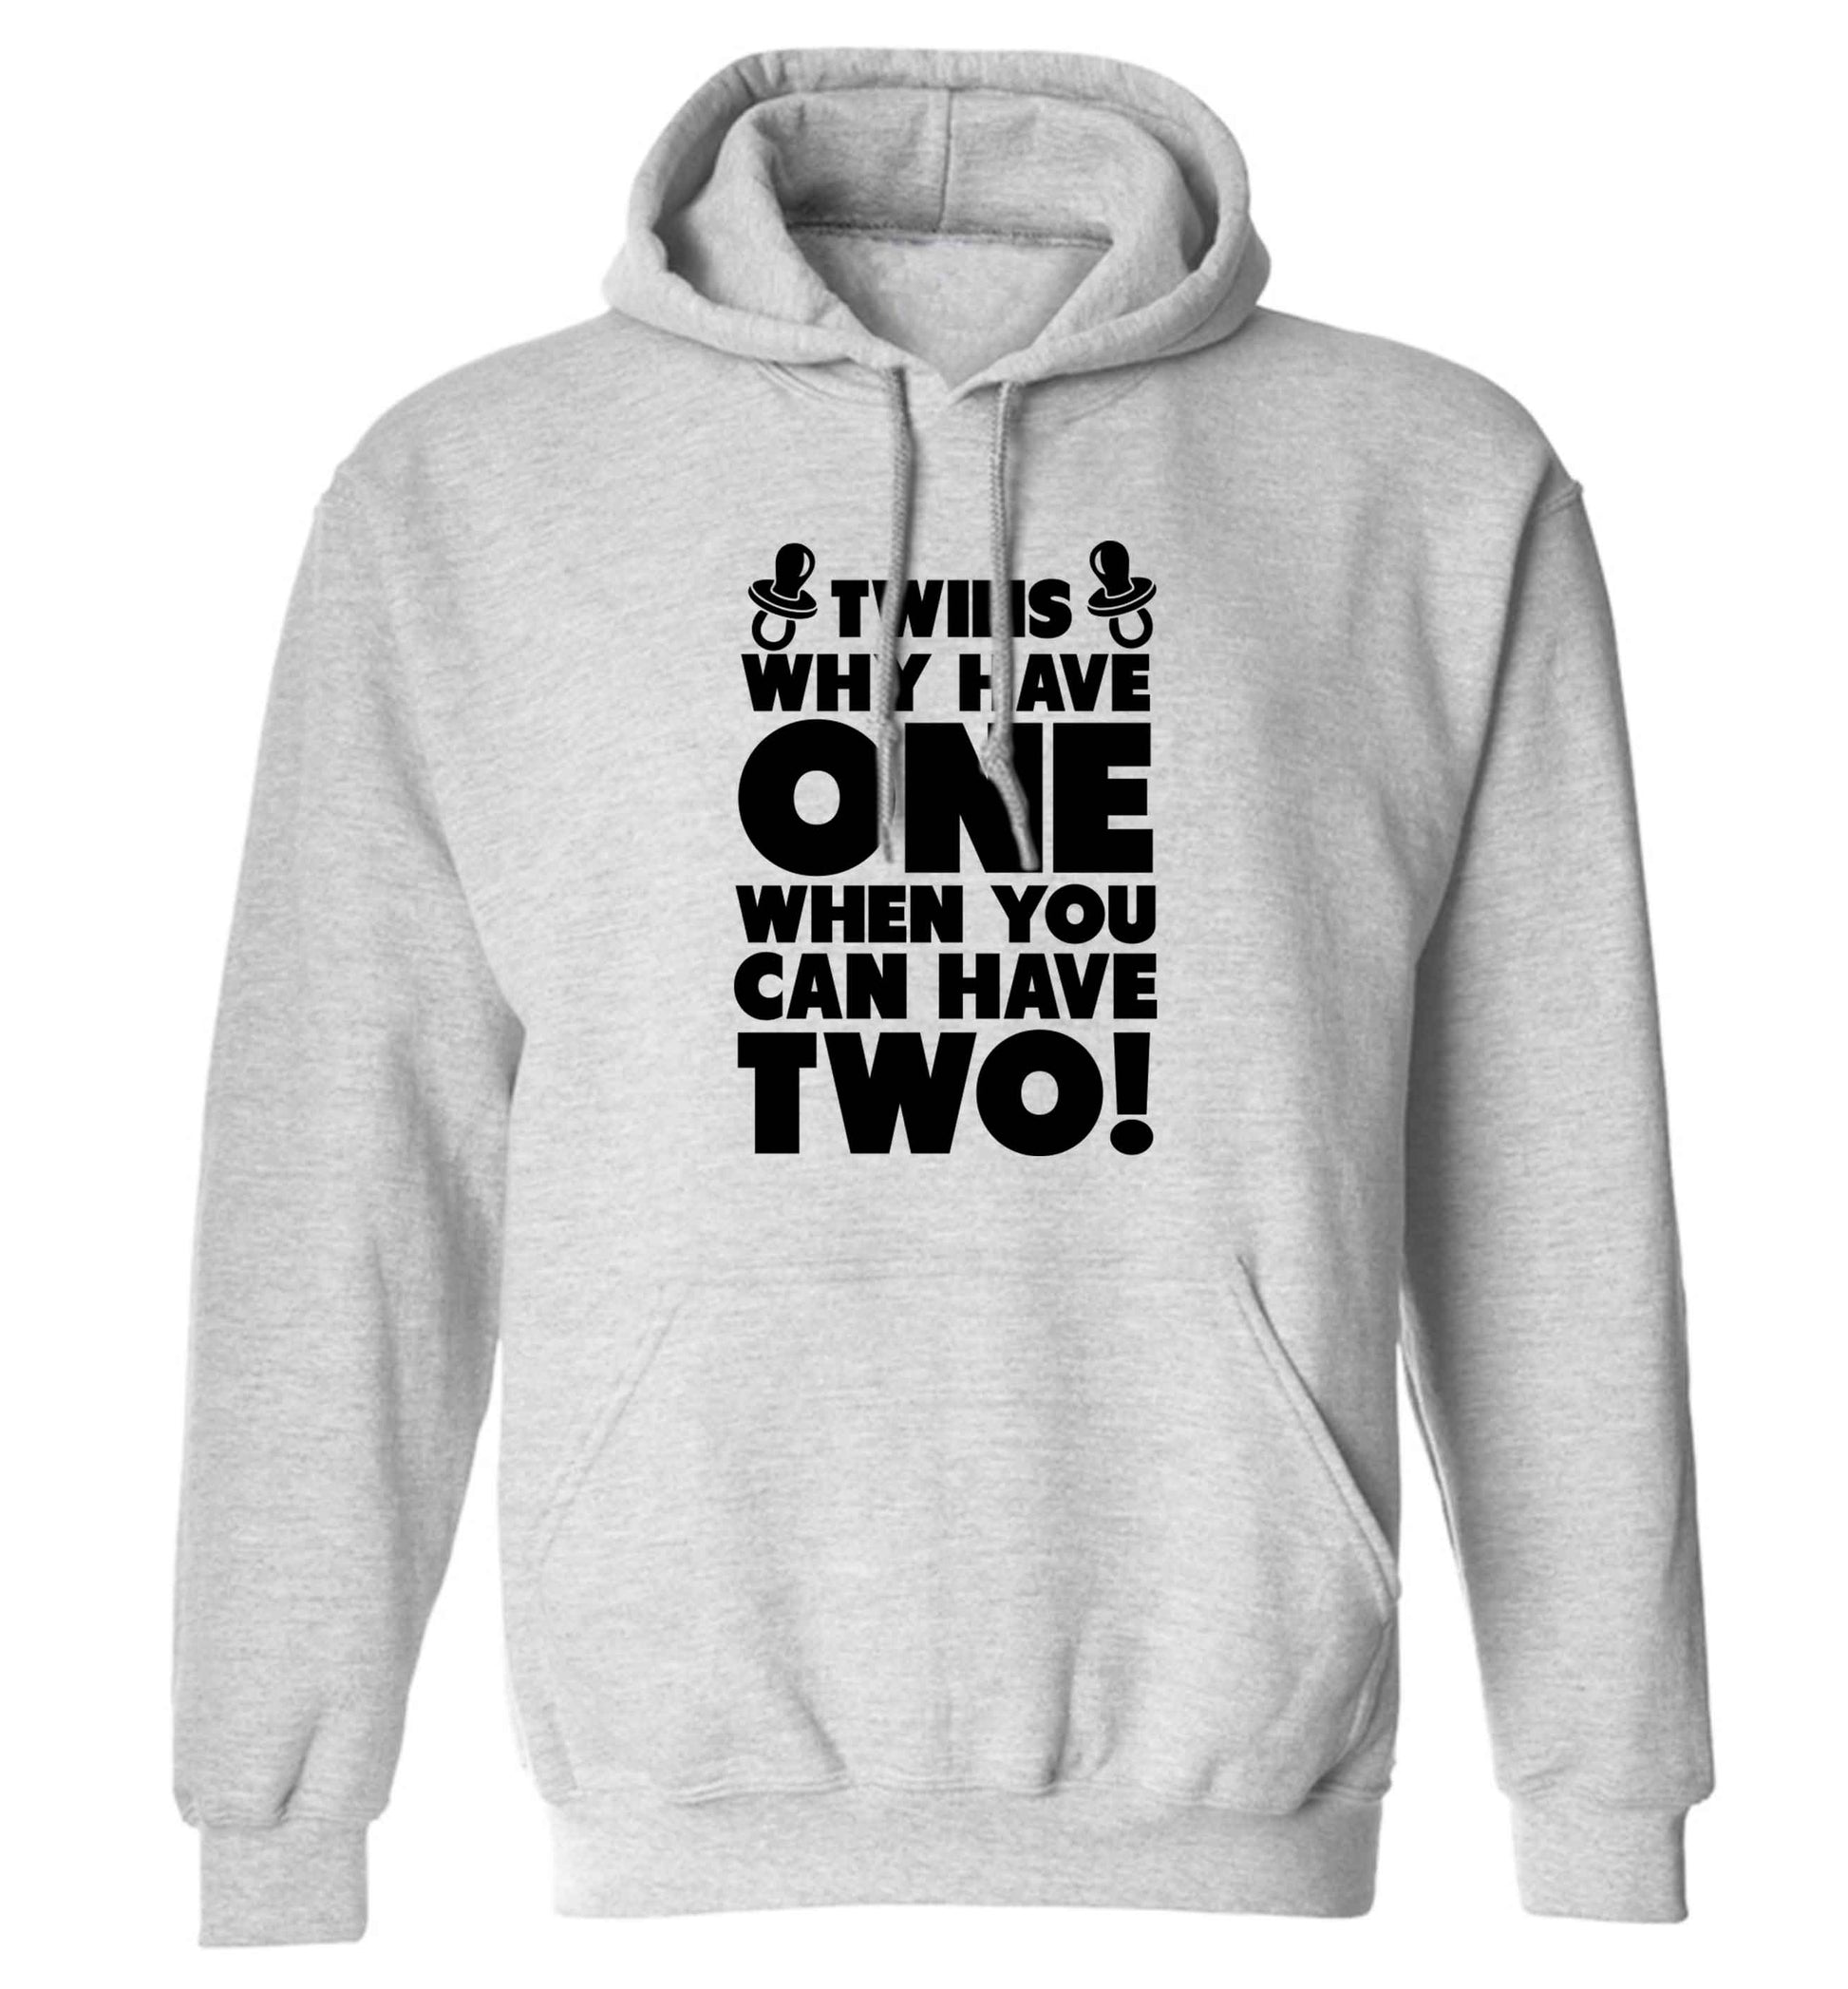 Twins why have one when you can have two adults unisex grey hoodie 2XL